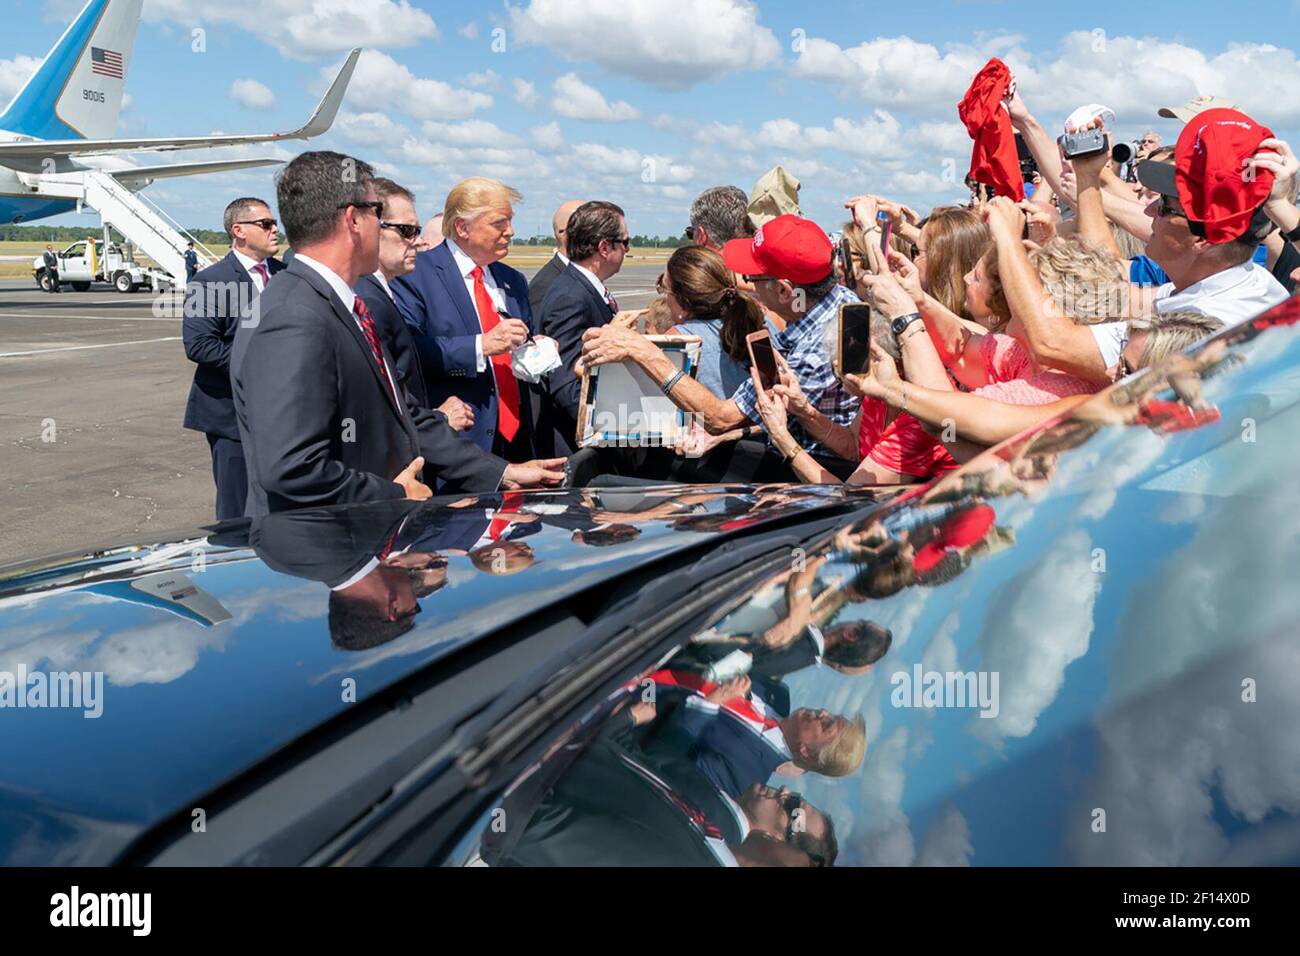 President Donald Trump shakes hands and poses for photos with supporters Thursday Oct. 3 2019 upon his arrival to Ocala International Airport in Ocala Fla. en route to visit The Villages FL. Stock Photo